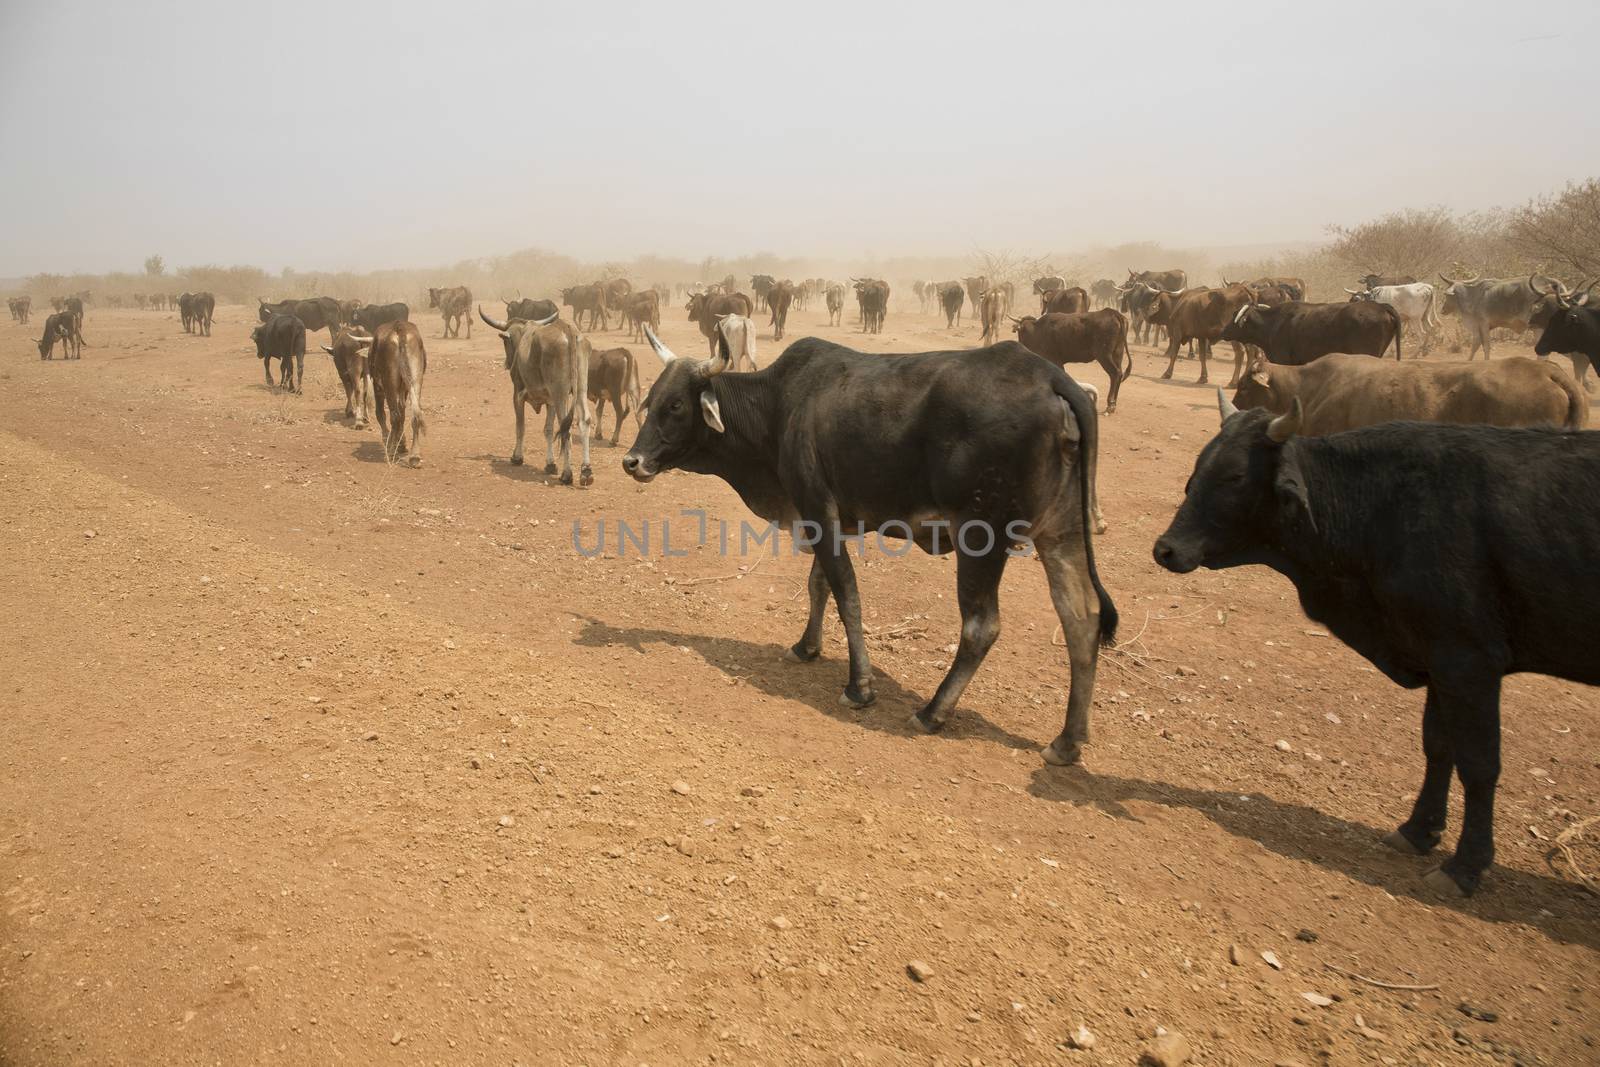 Cattle farm in Northern Namibia, Africa by Tjeerdkruse